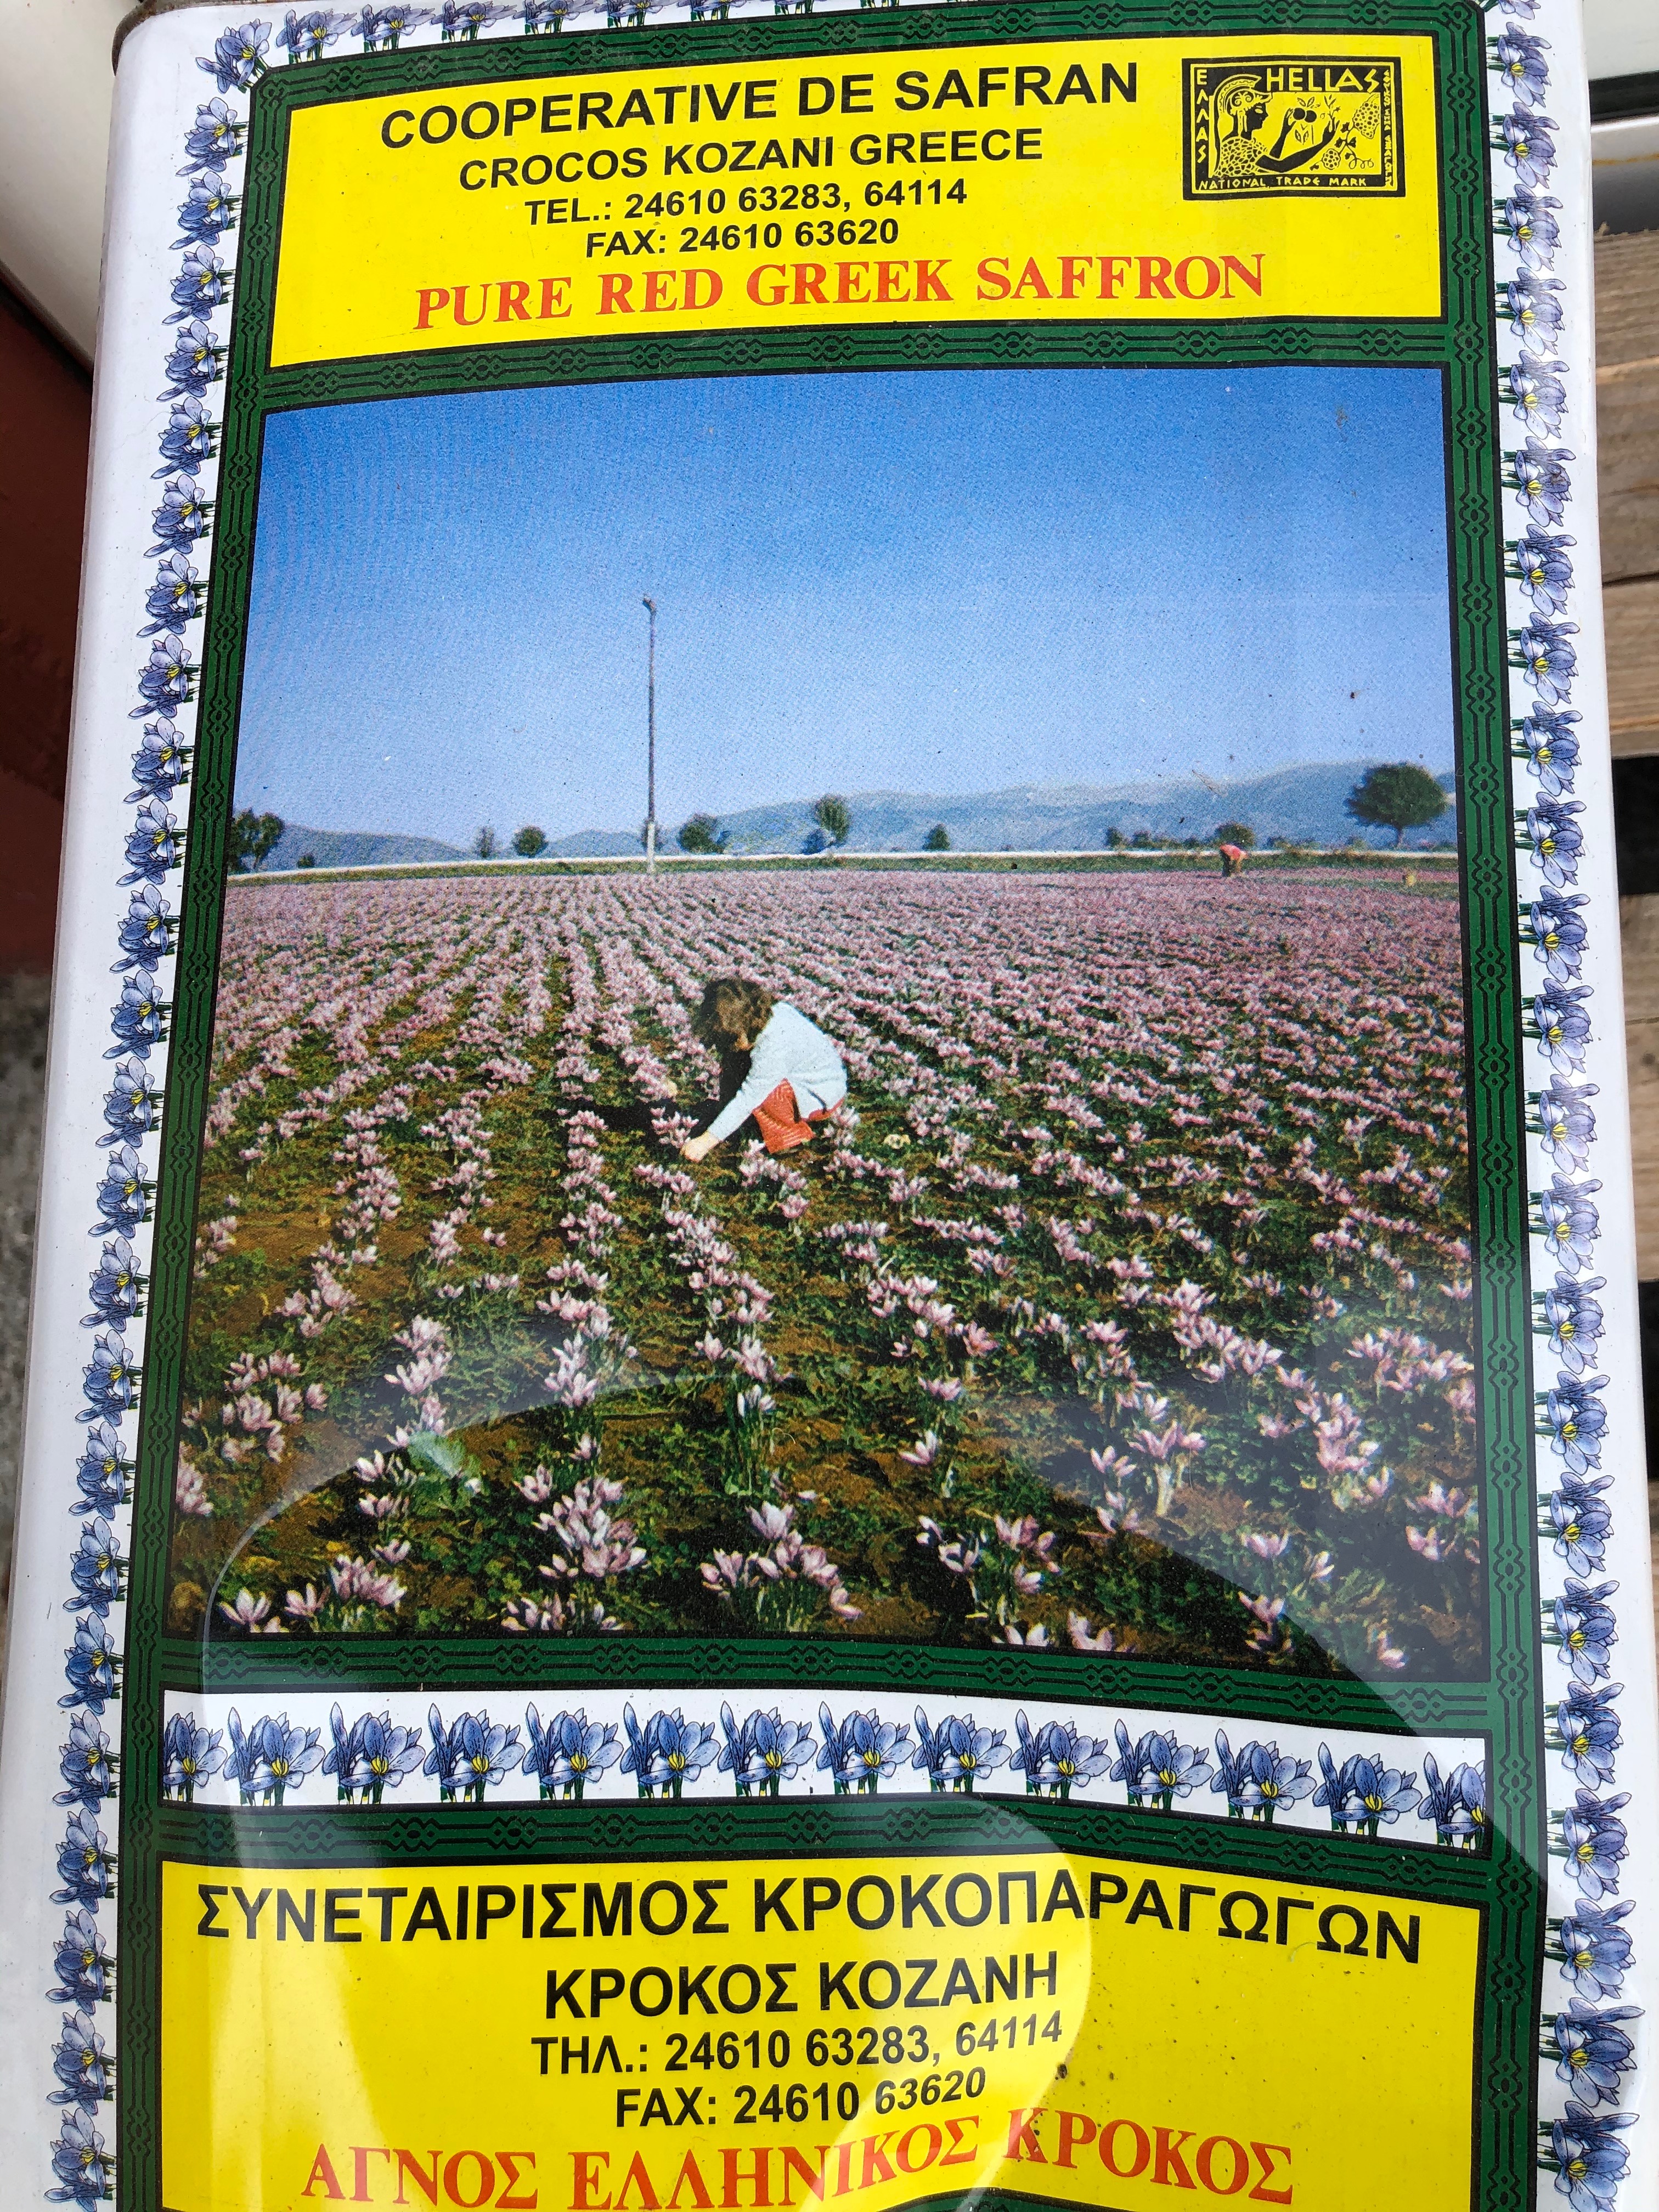 Label on a big can of final product, showing a fine field in bloom.